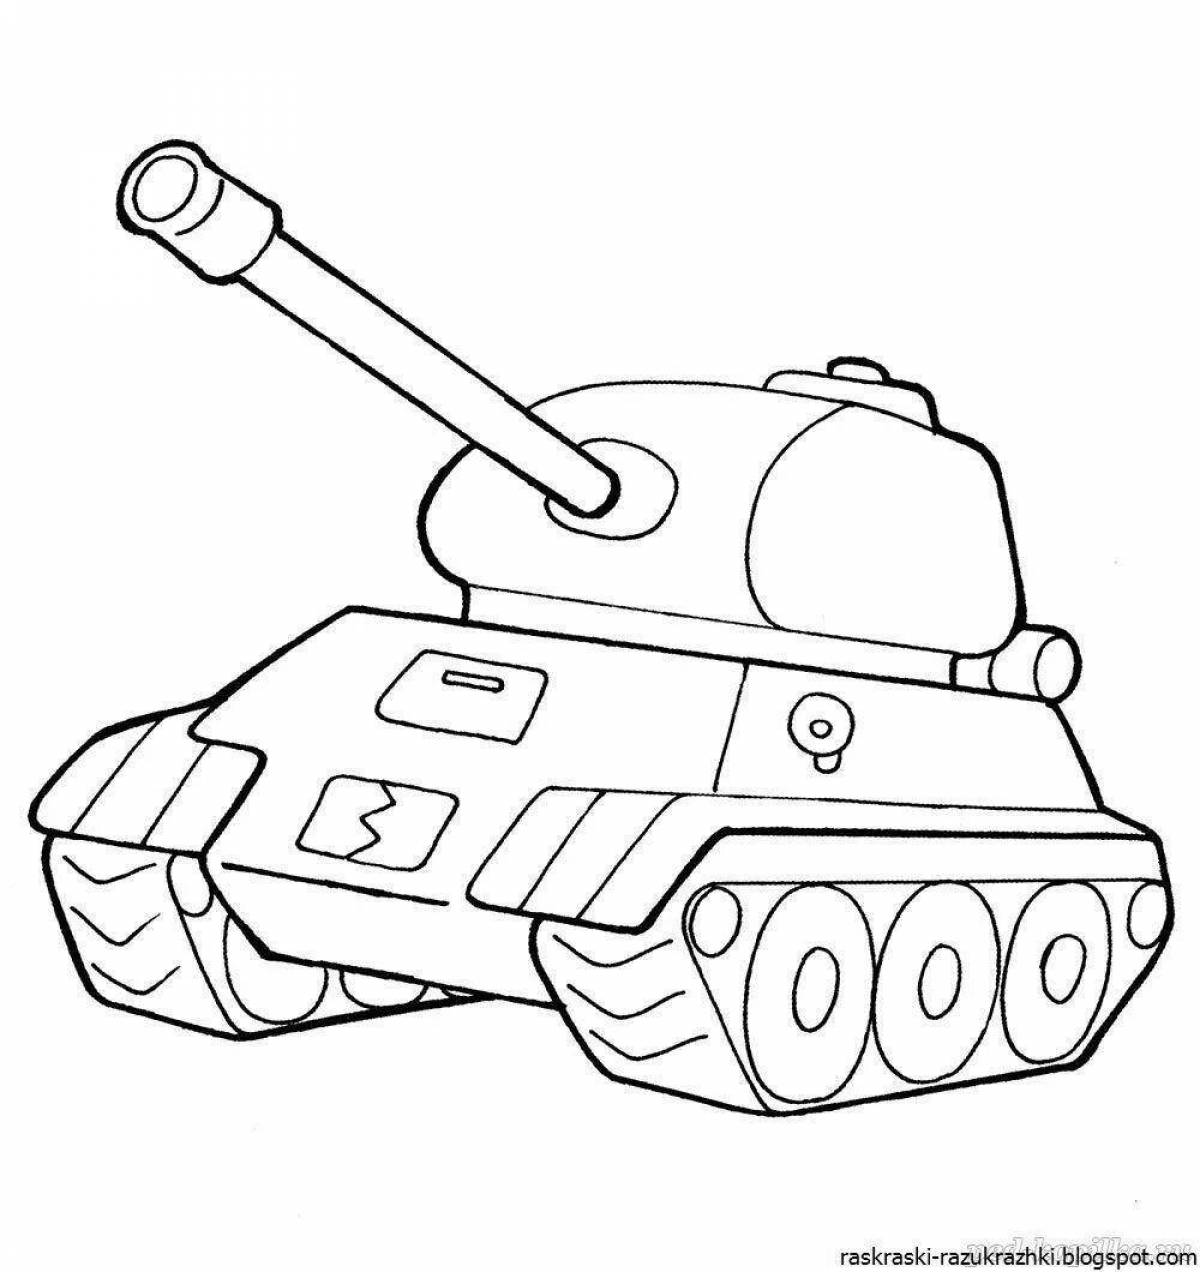 Colored military vehicles coloring page for 3-4 year olds